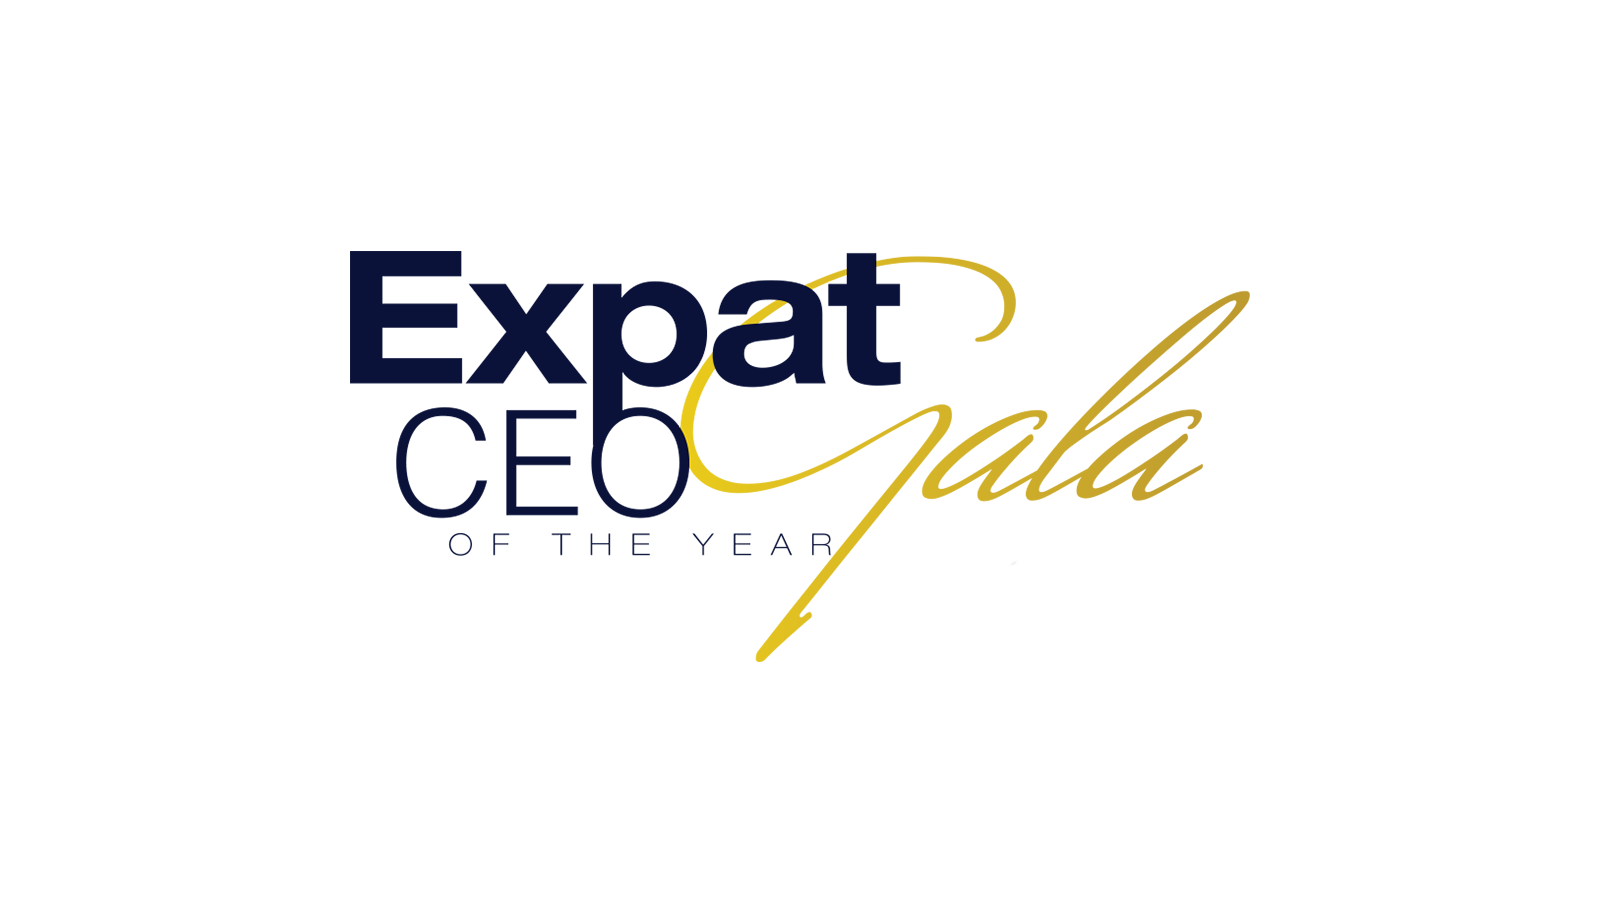 Meet the Expat CEO of the Year Nominees